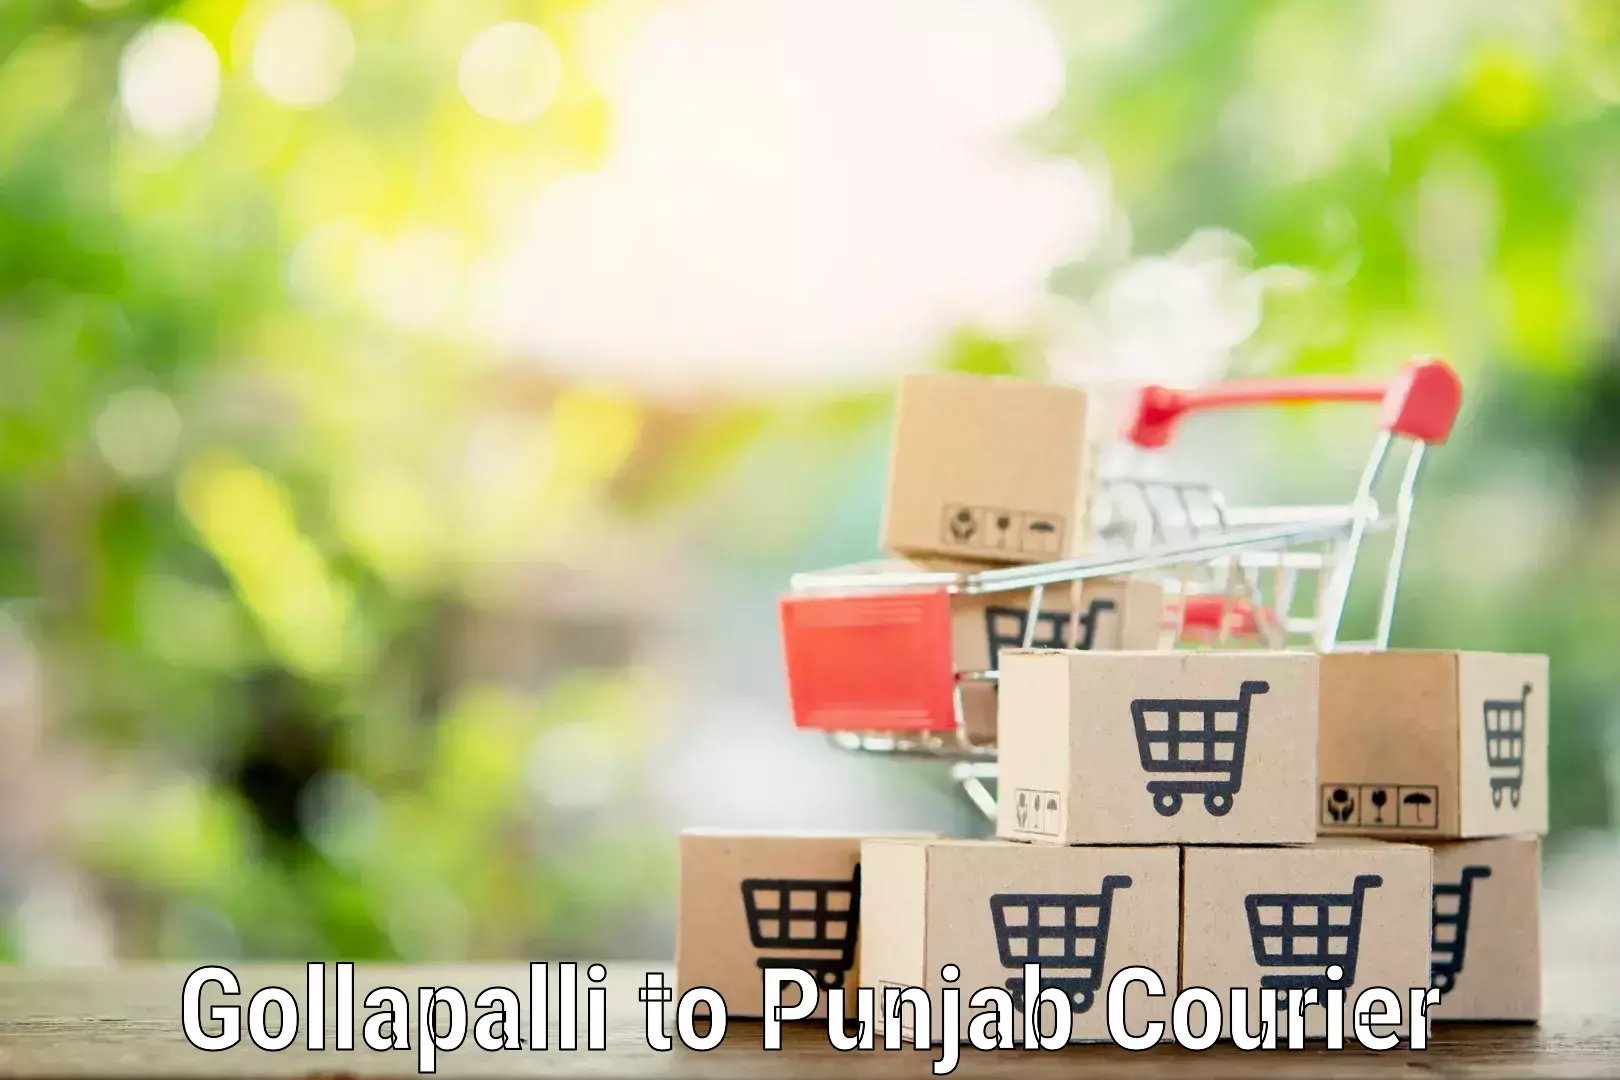 Home relocation experts Gollapalli to Phillaur